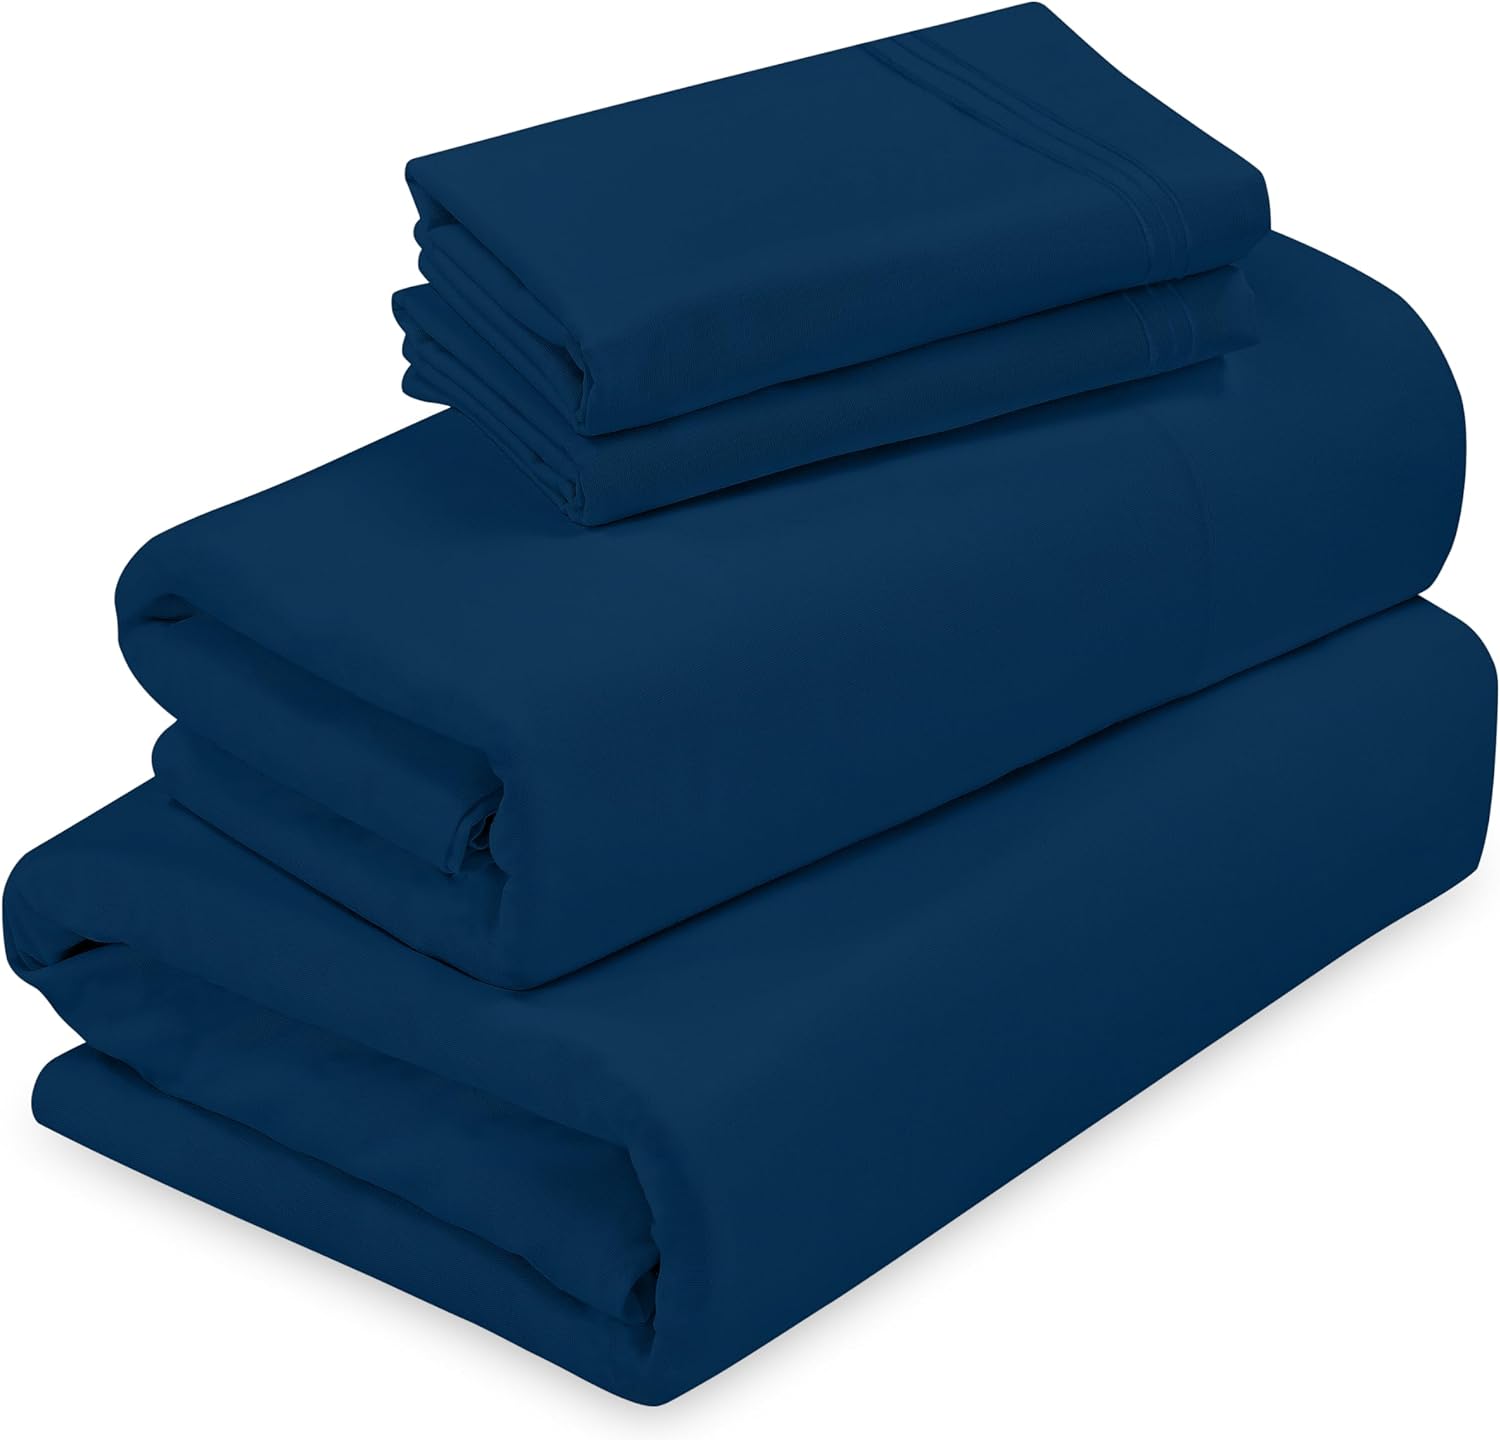 ROYALE LINENS - 4 Piece Full Bed Sheet - Soft Brushed Microfiber 1800 Bedding Set - 1 Fitted Sheet, 1 Flat Sheet, 2 Pillow Cases - Wrinkle & Fade Resistant Luxury Full Size Sheet Set (Full, Navy)